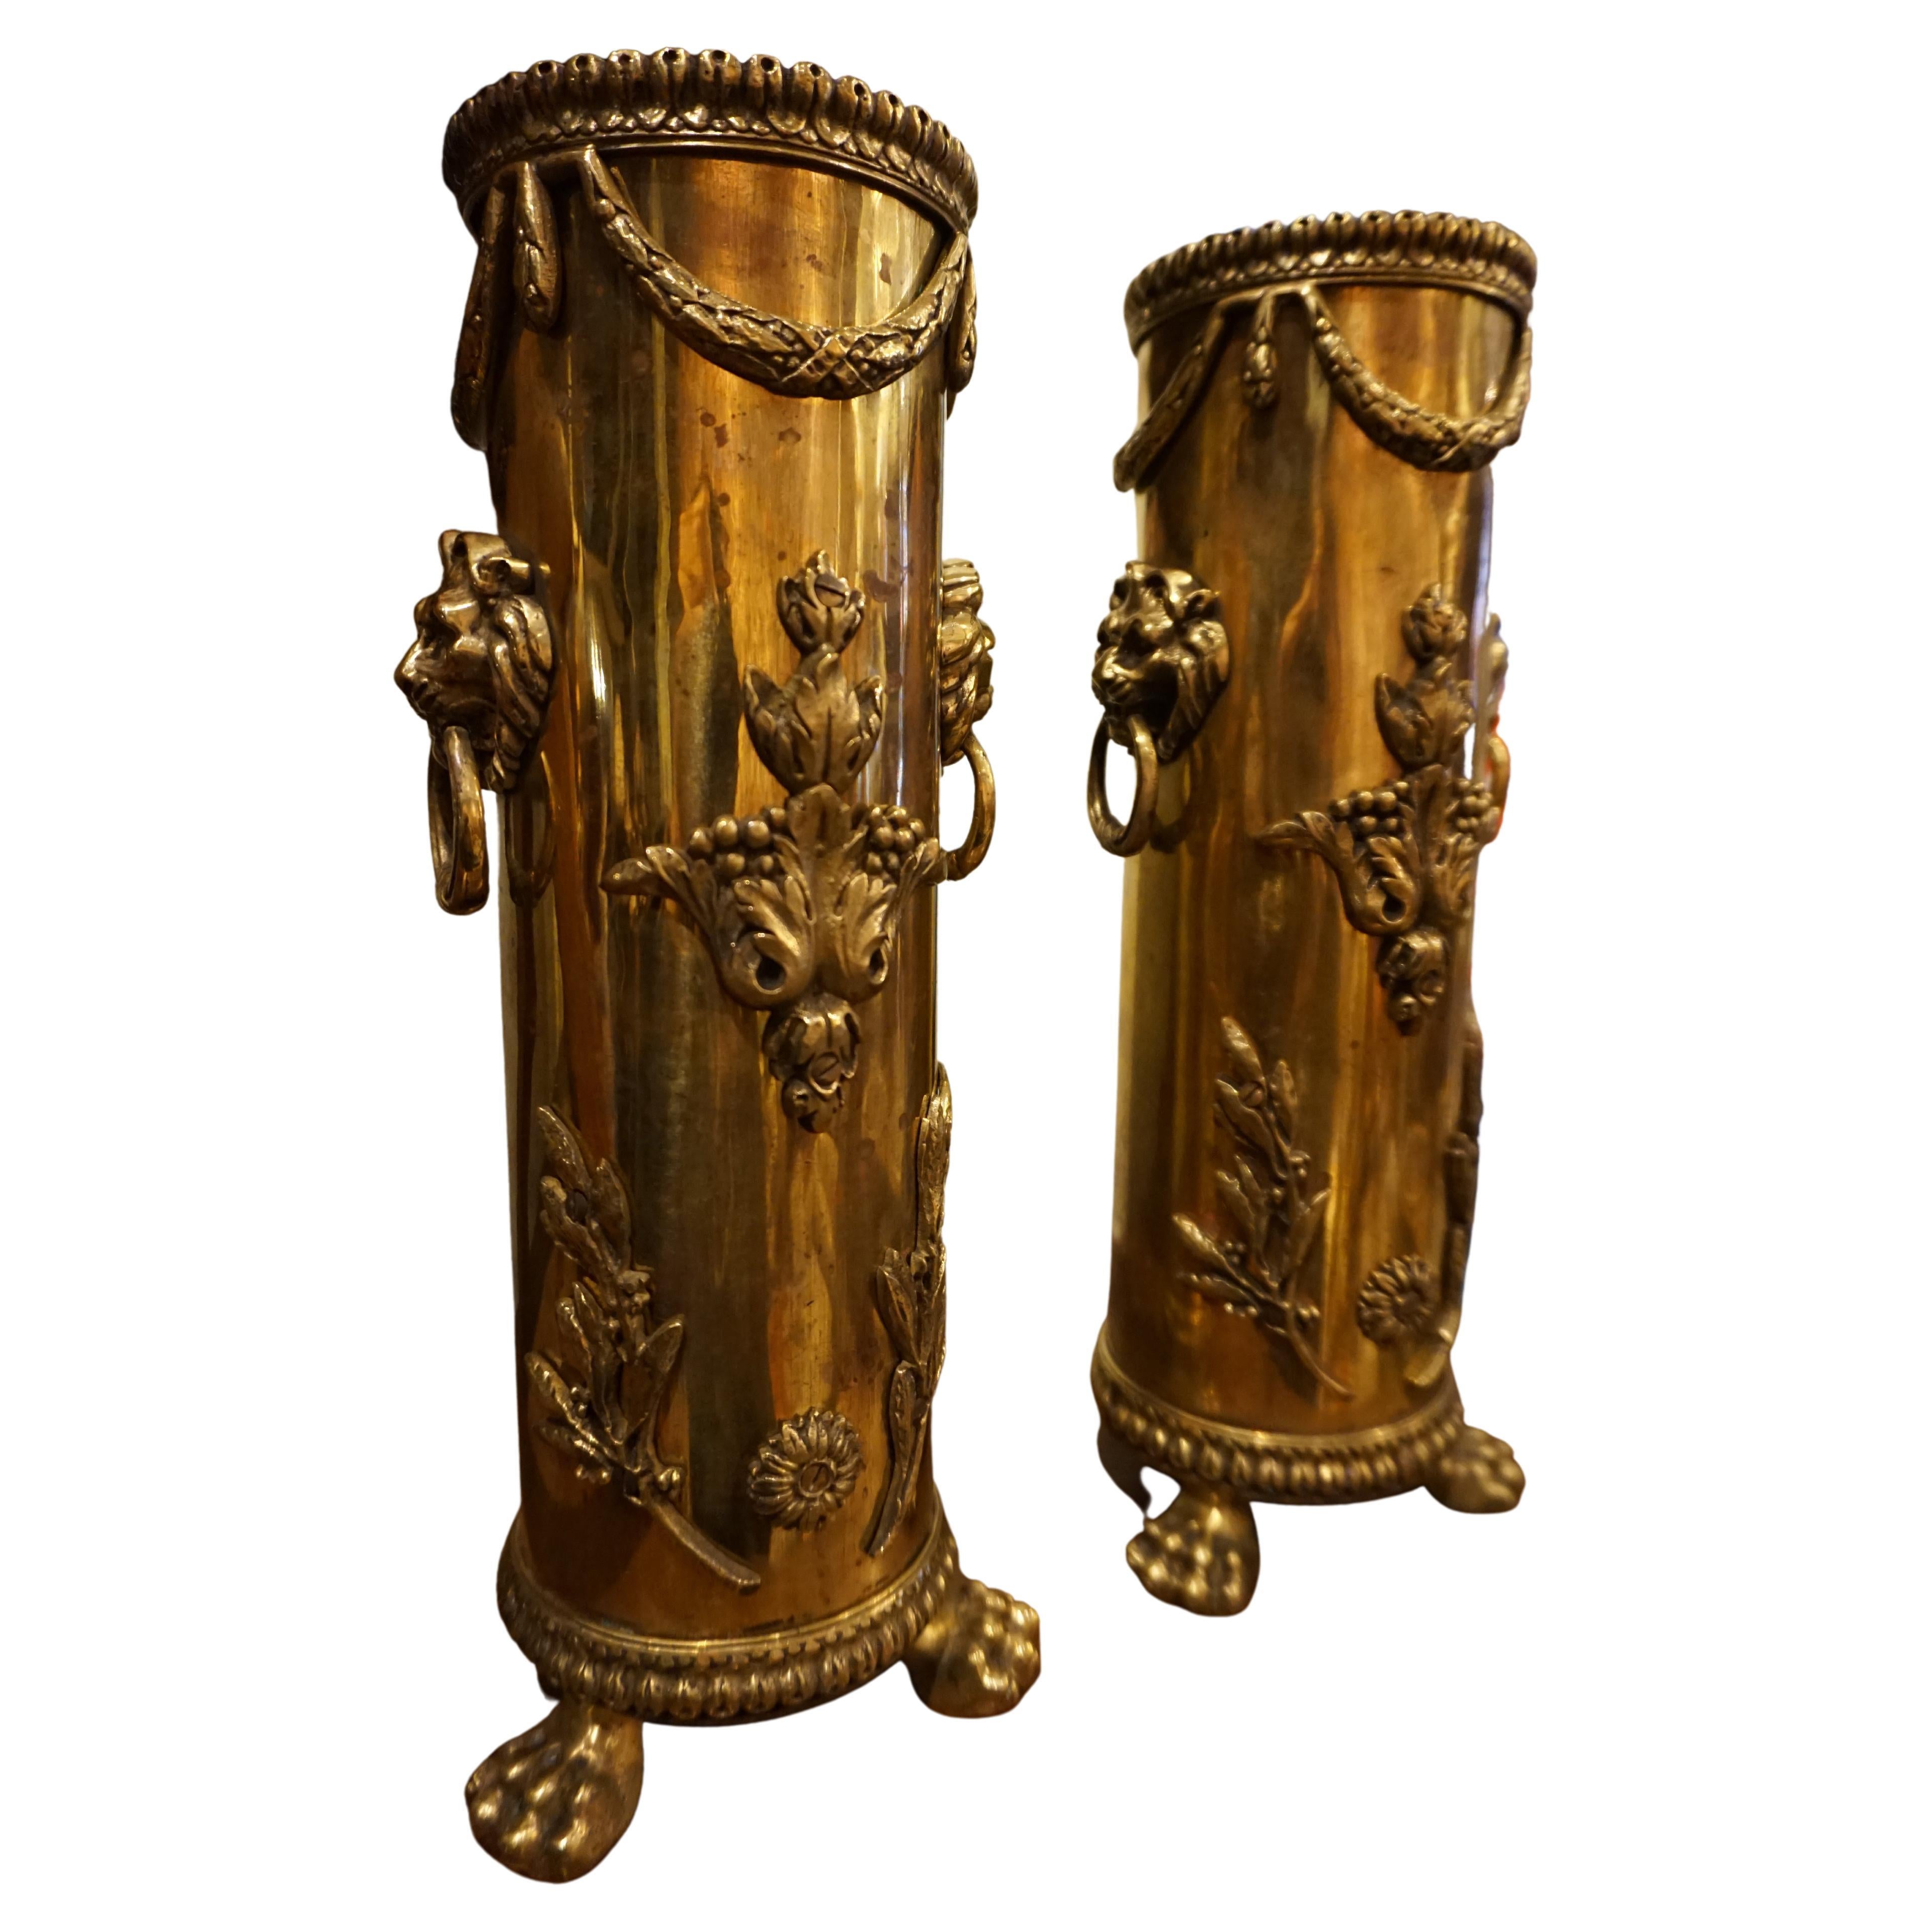 Rare WW1 1916 French Trench Art Solid Brass Shell Casing Vases with Lion Heads For Sale